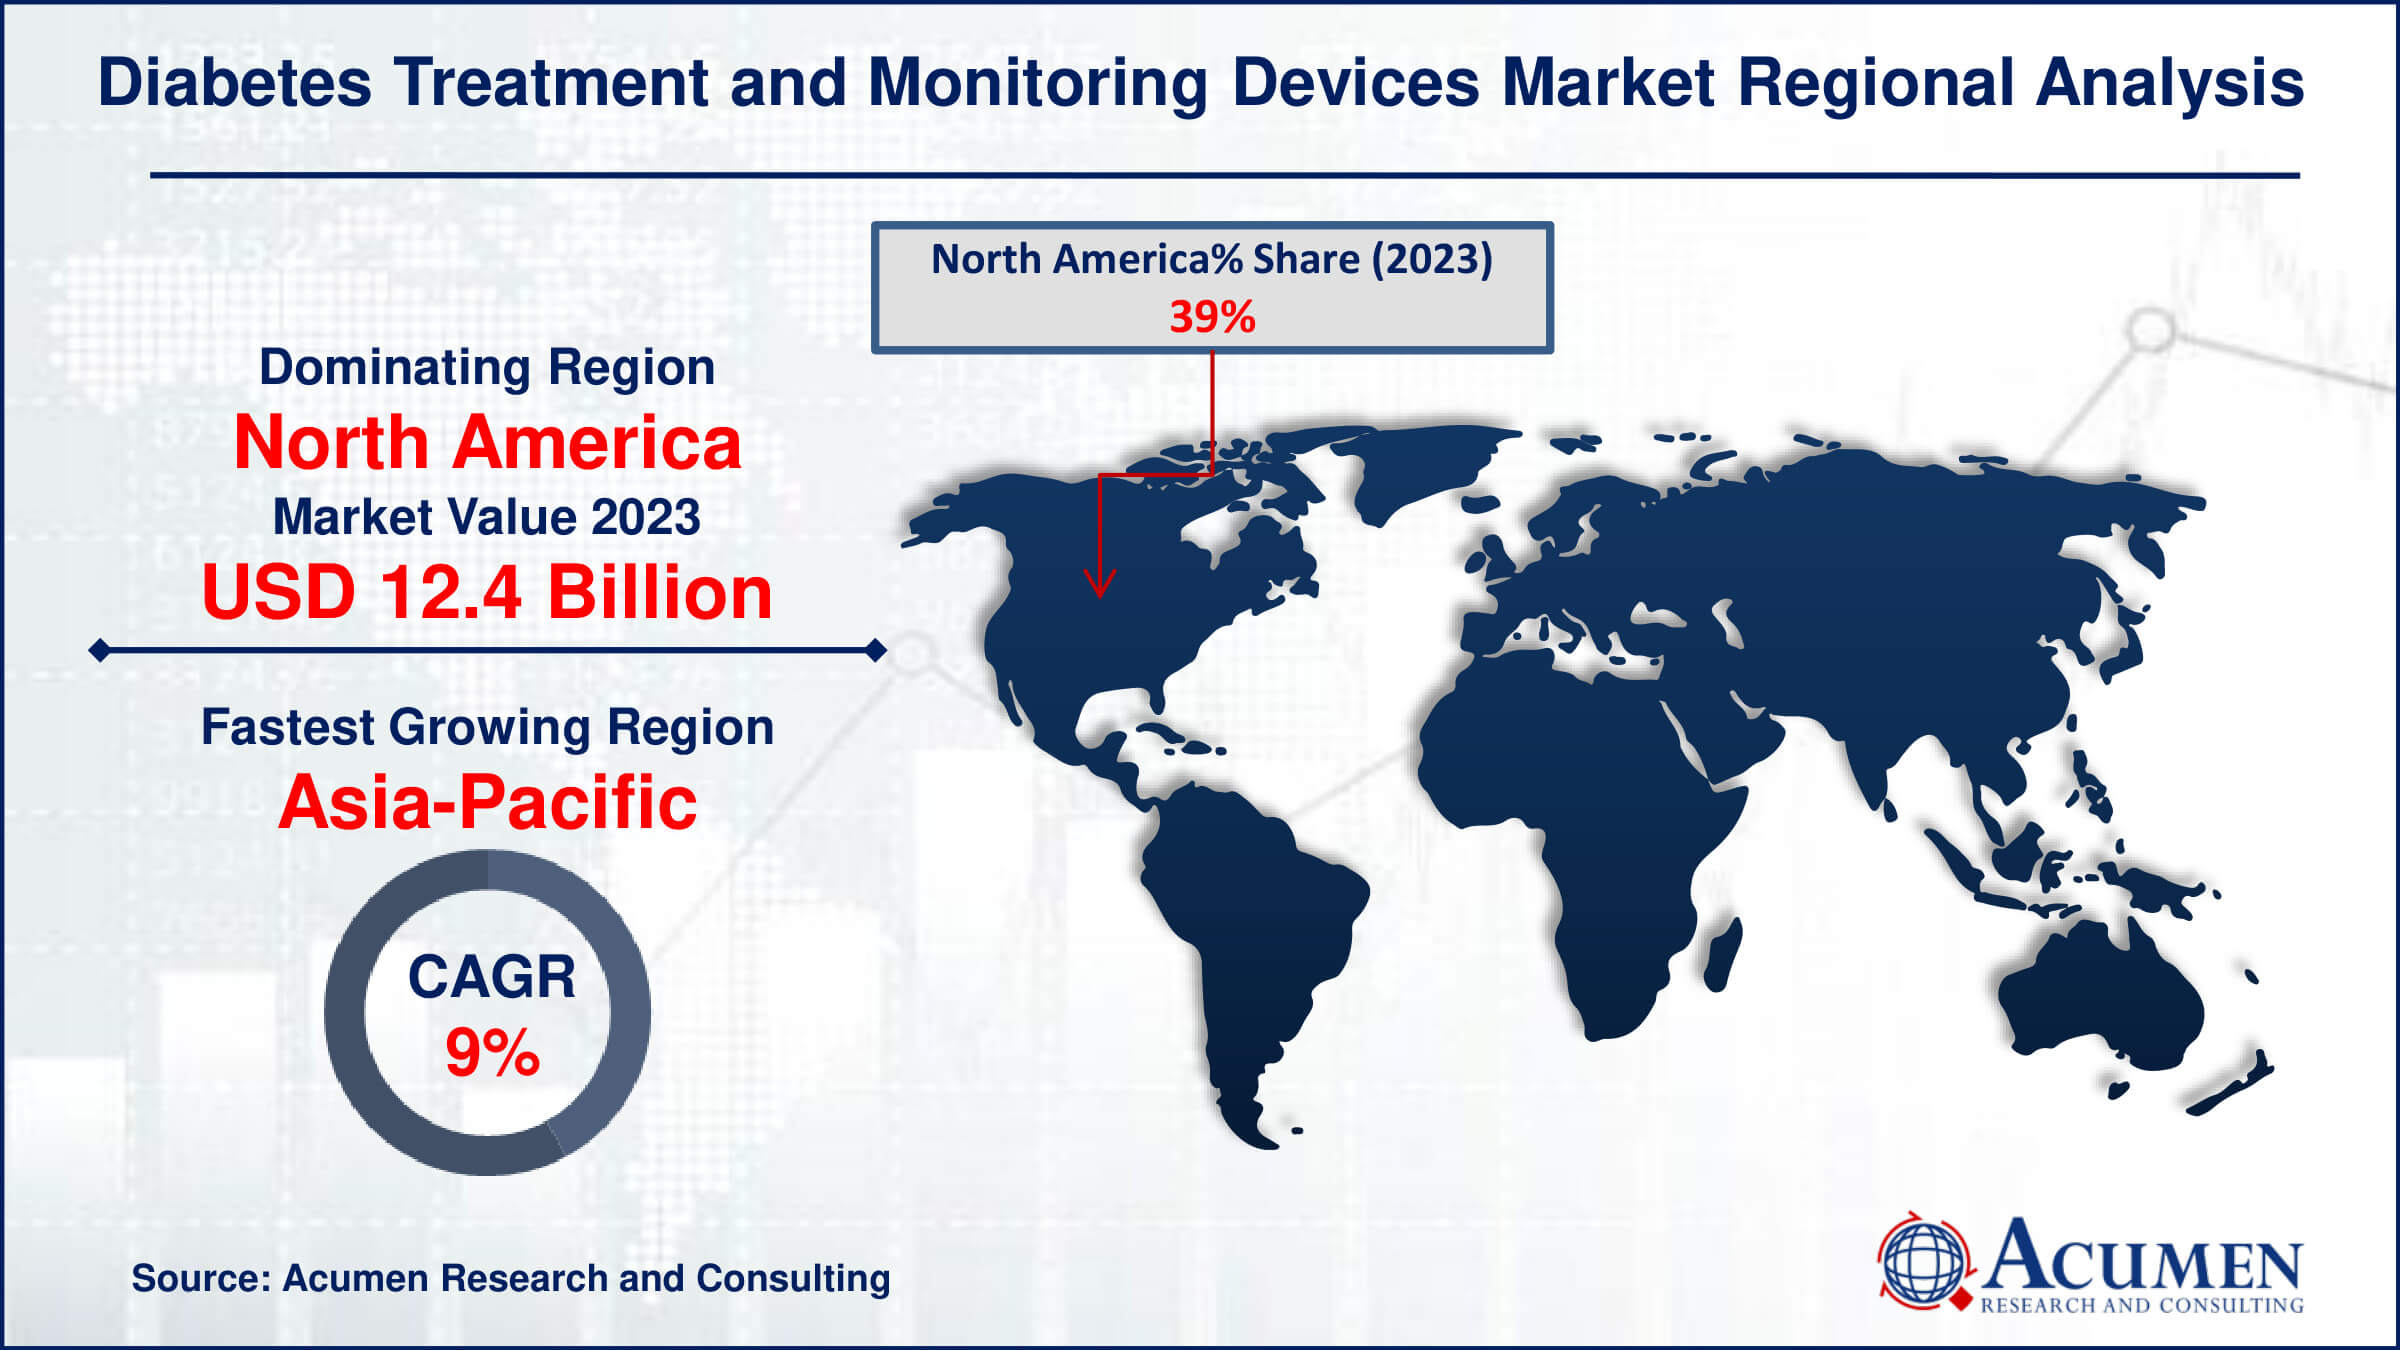 Diabetes Treatment and Monitoring Devices Market Drivers